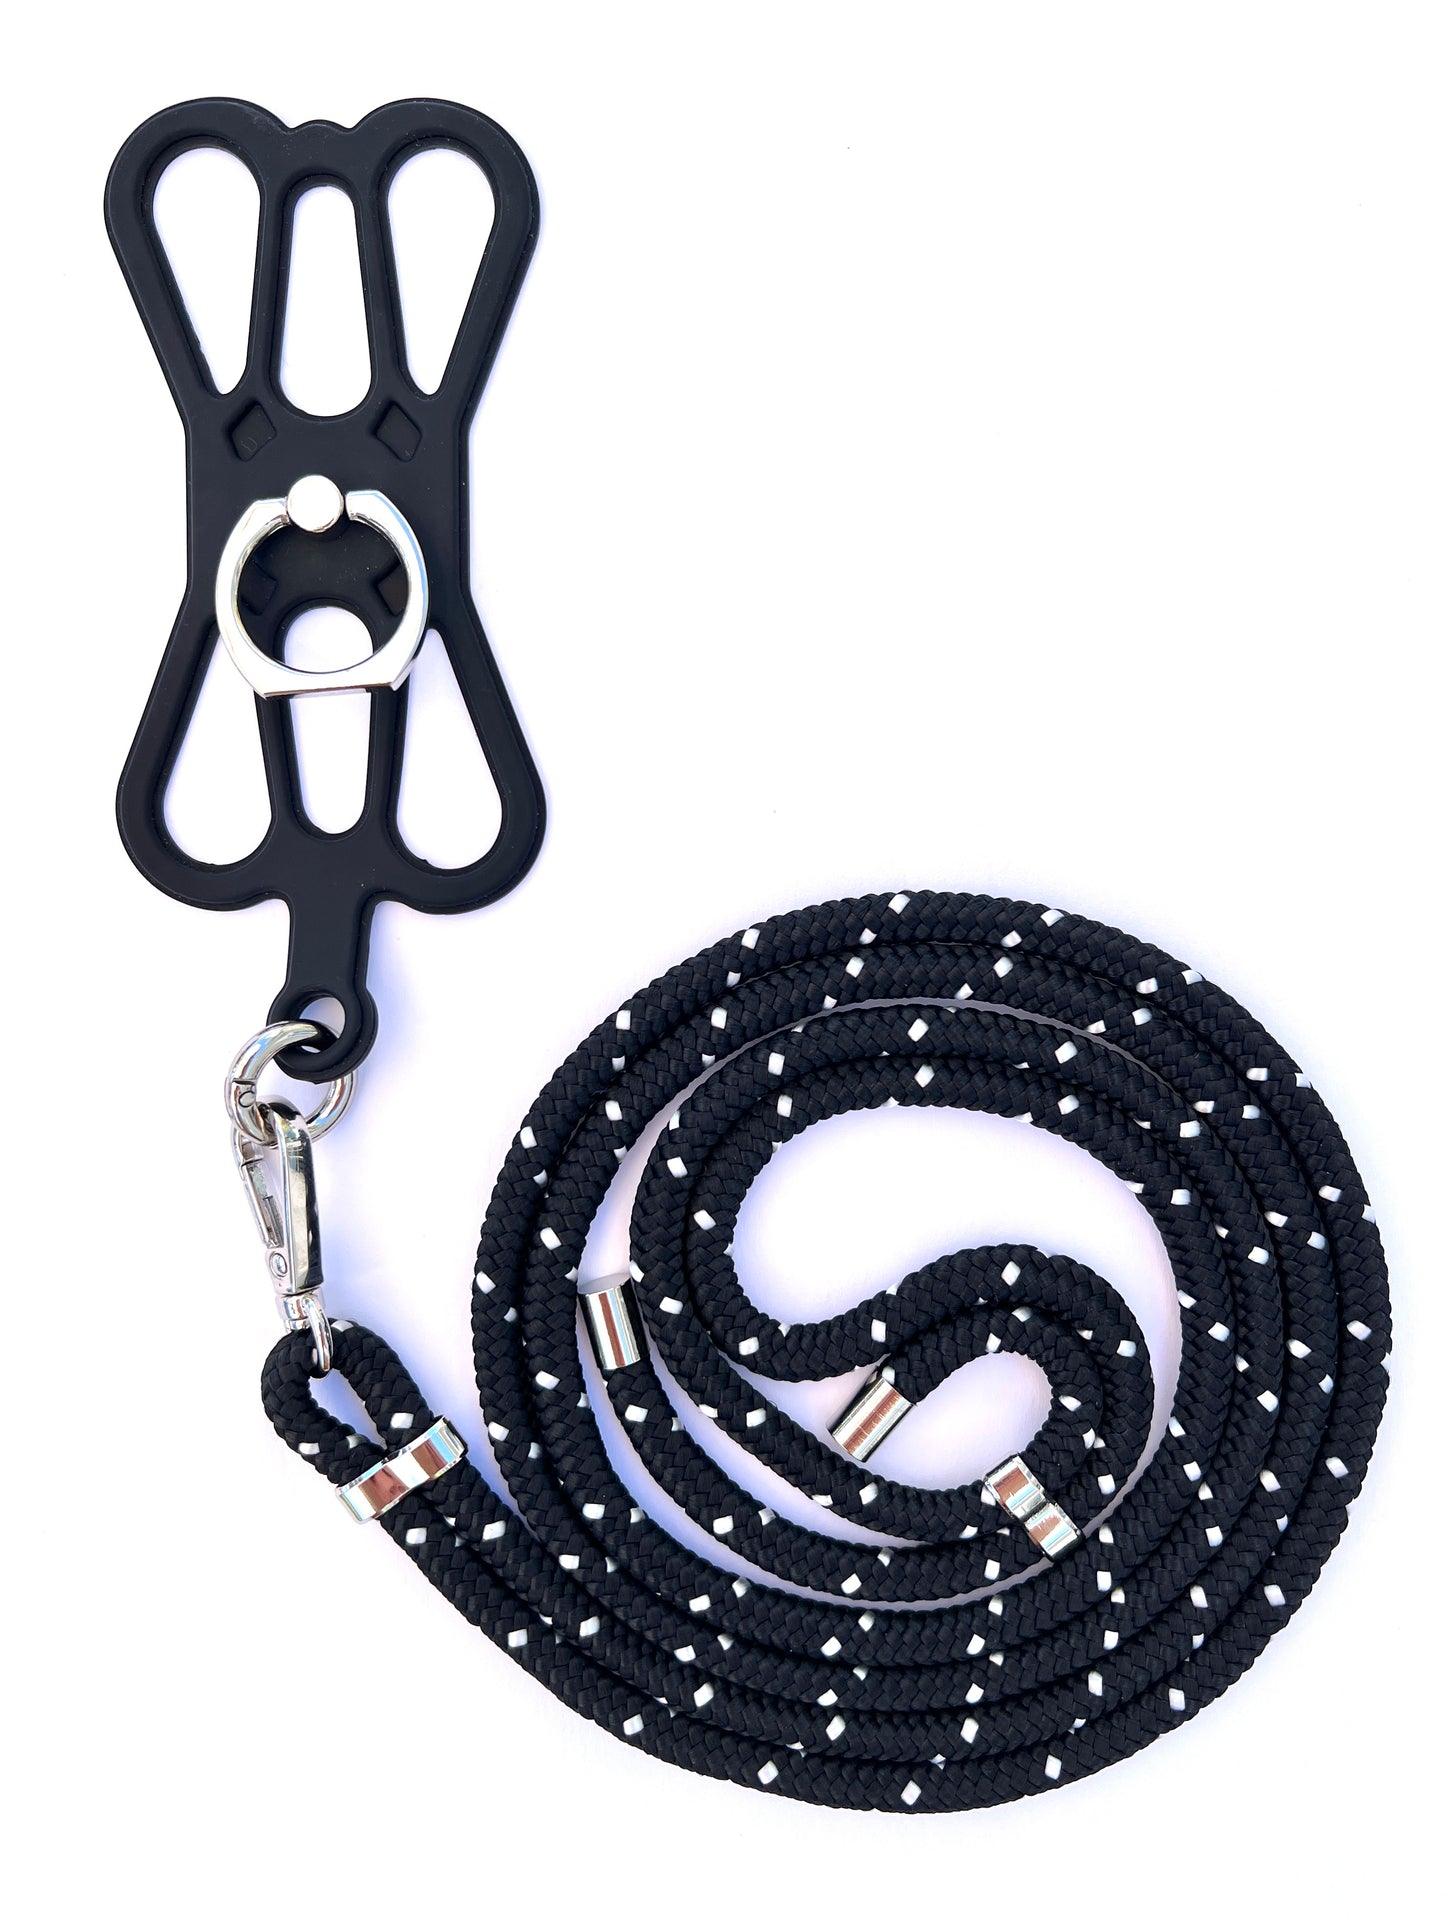 Silicon Holder Phone Strap - Black with White Dots